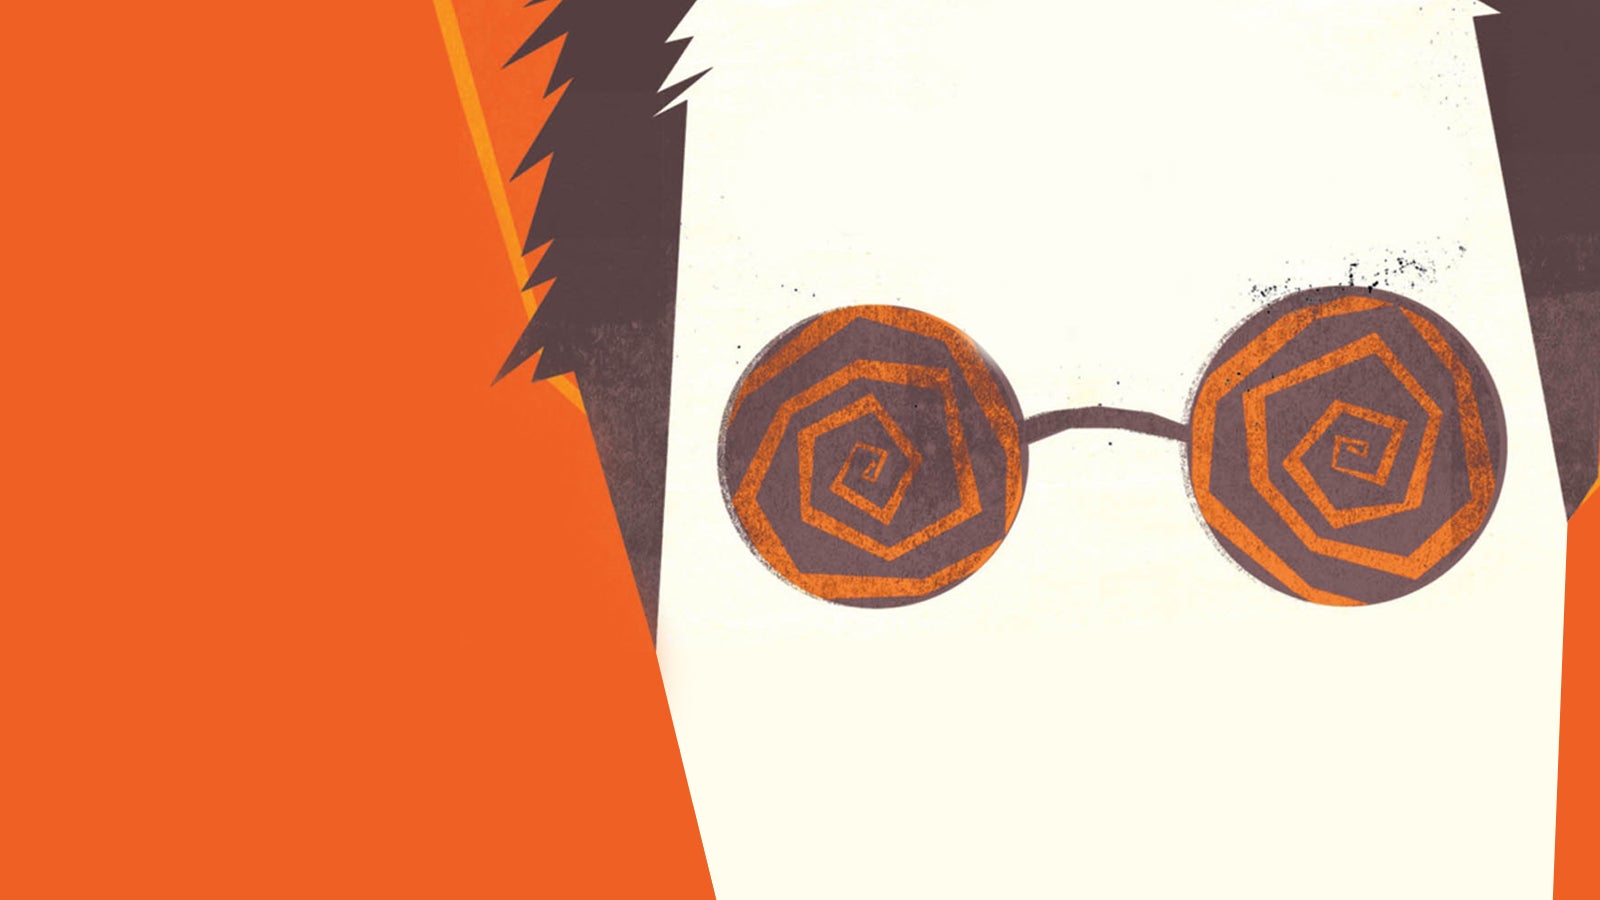 Illustration taken from the front cover of The Psychopath Test showing a man wearing glasses with spirals on the lenses